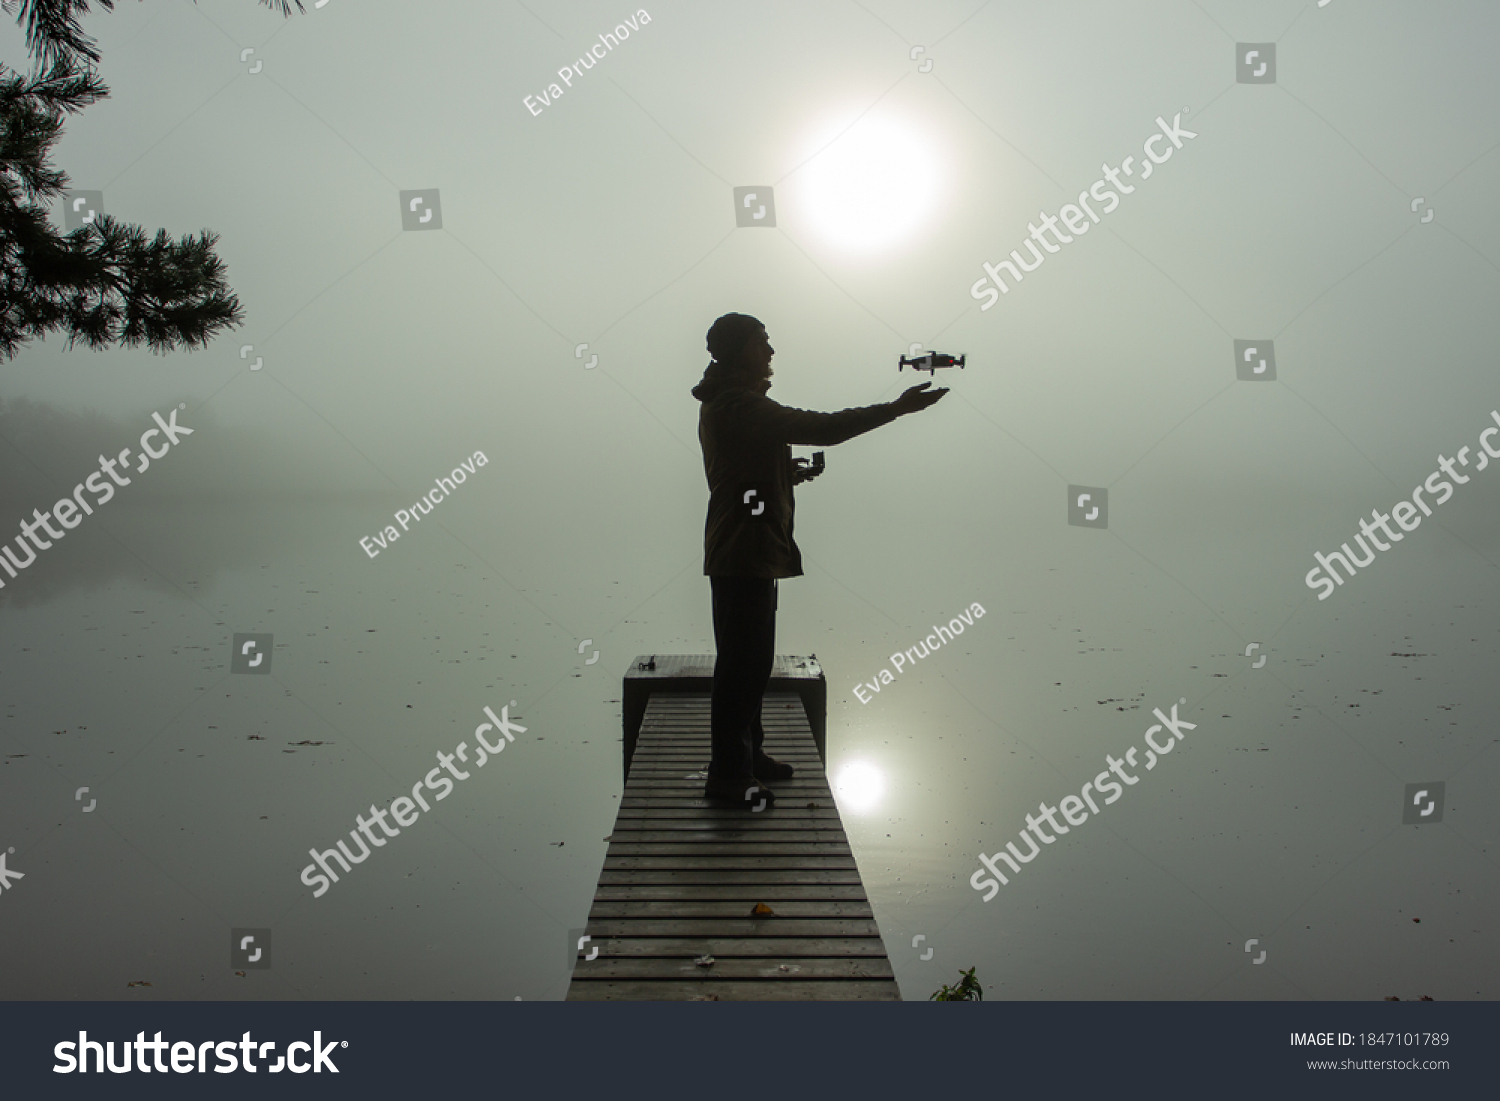 Man playing with the drone. Silhouette against the foggy landscape.Male operating the drone by remote control and having fun. Pilot flying drone. Use of drone outdoors, piloting and media work #1847101789